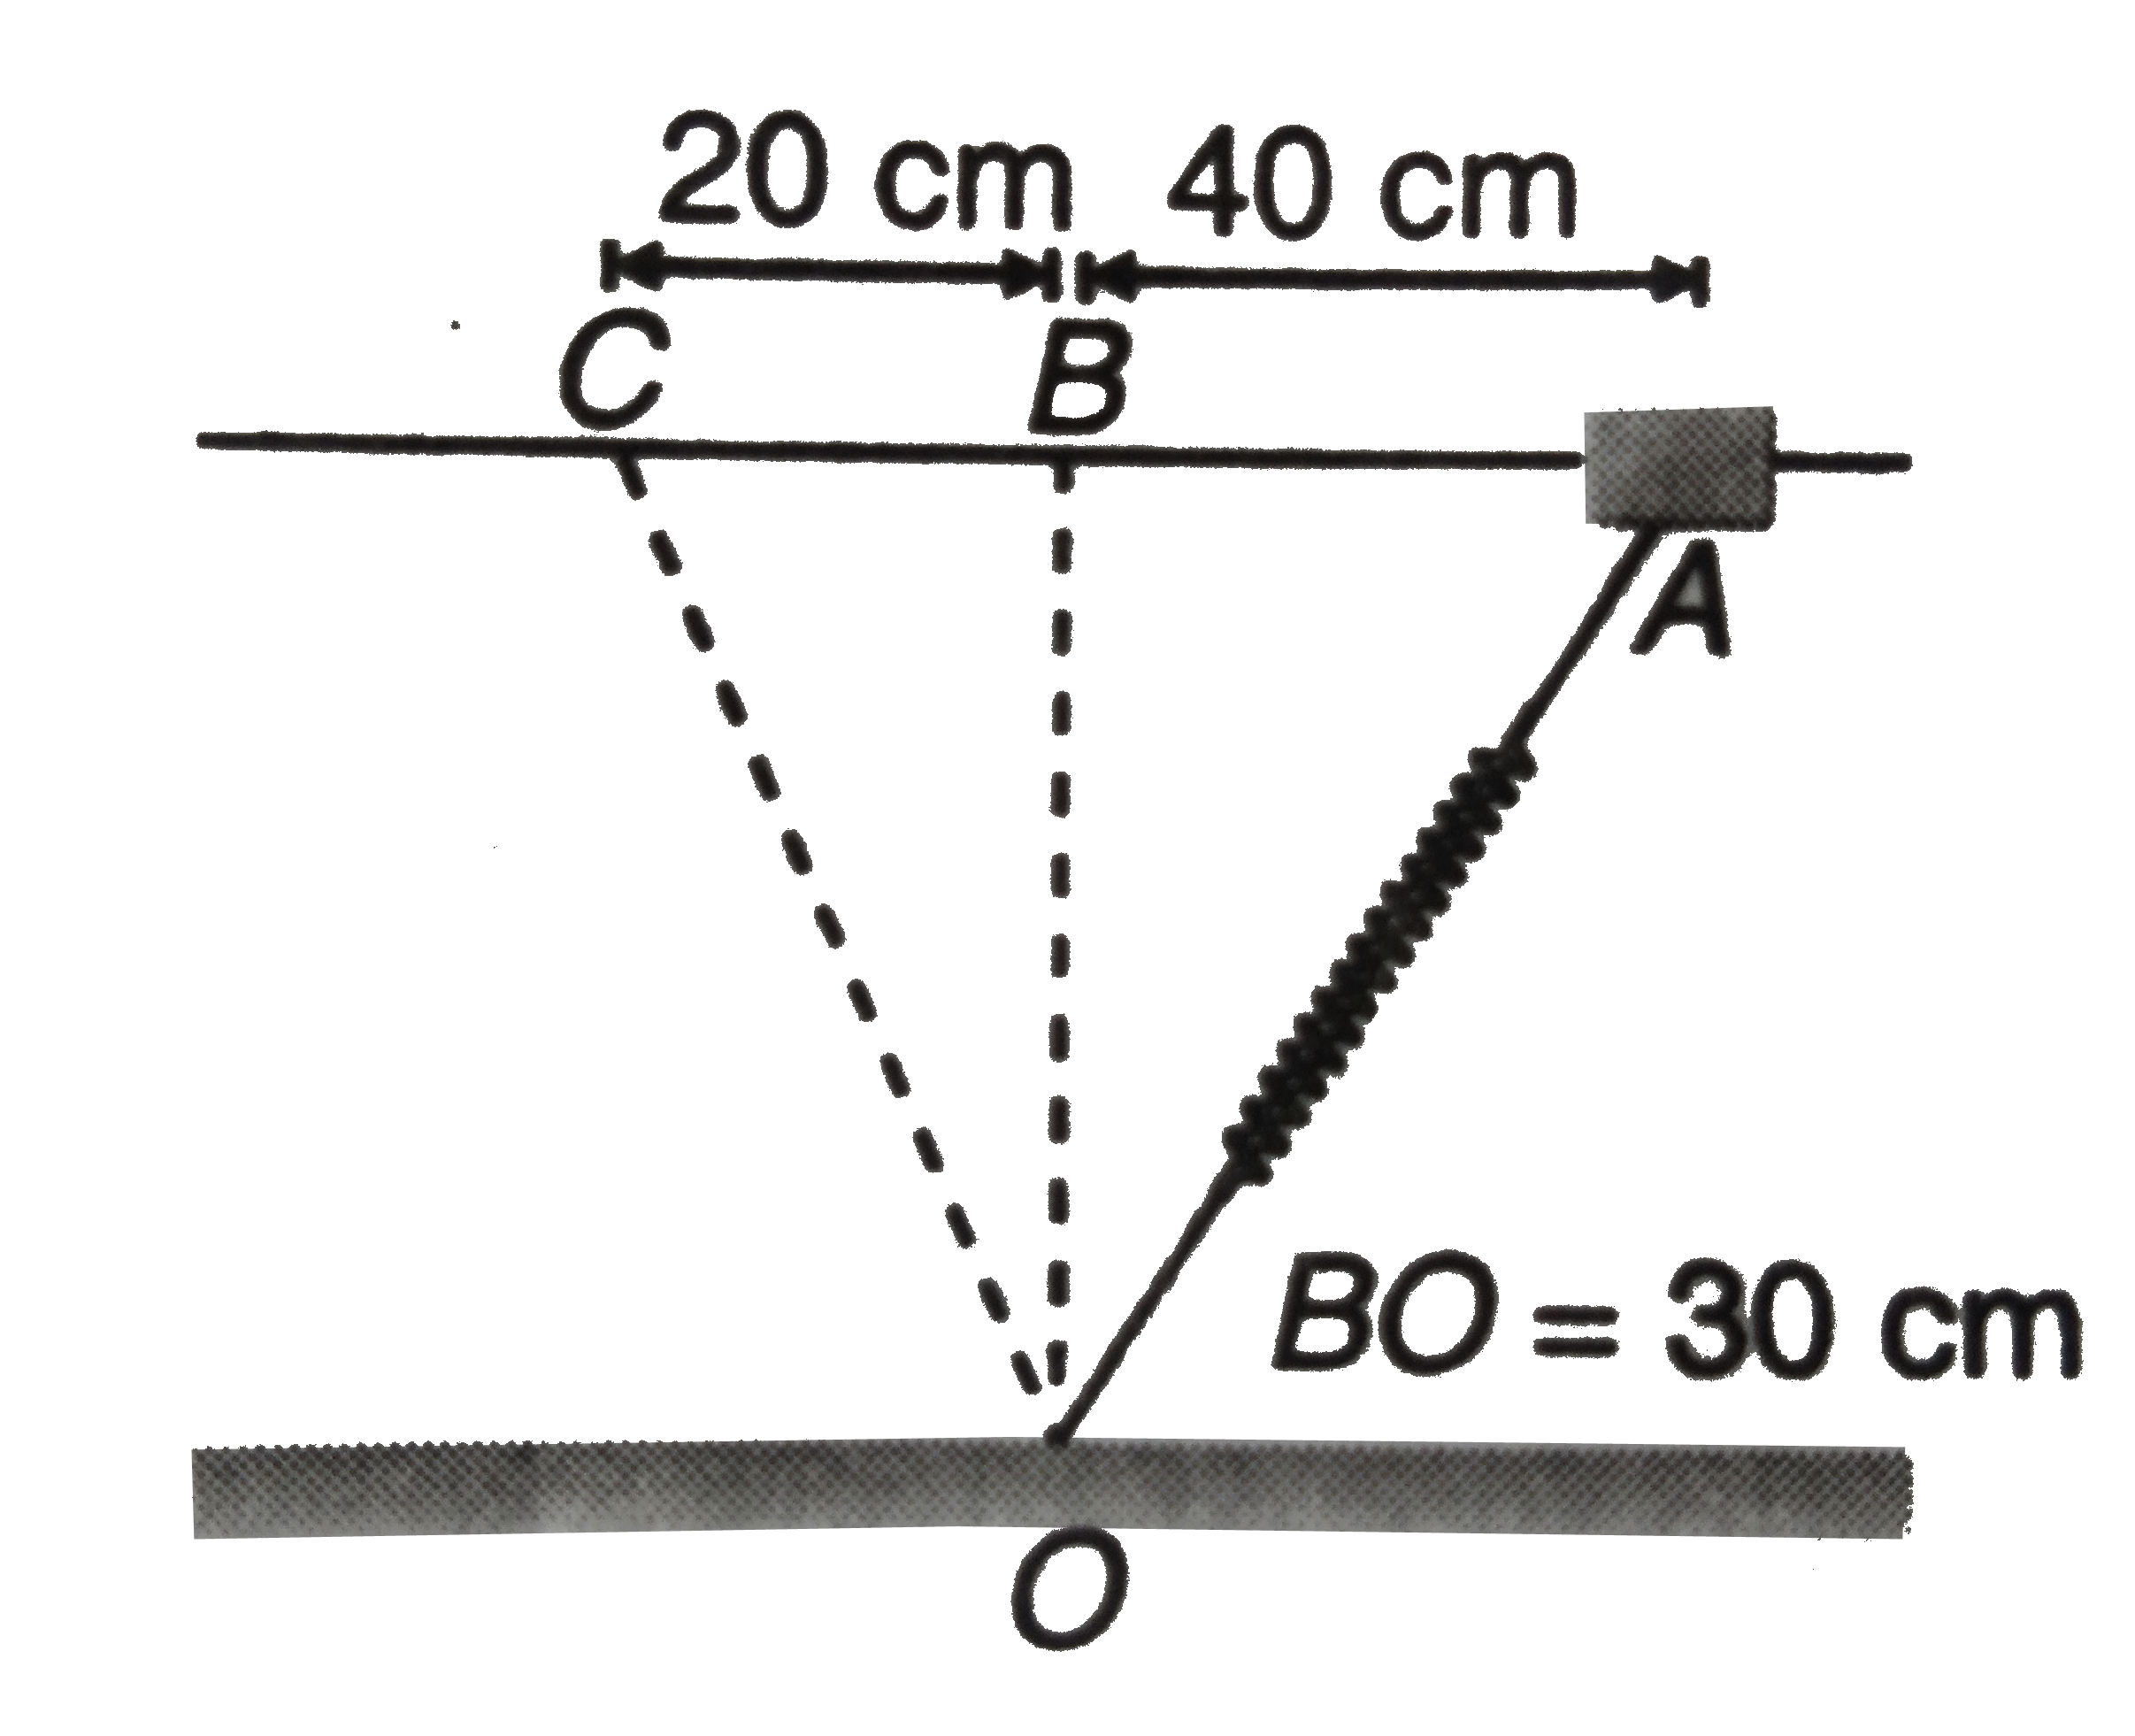 As shown in figure a smooth rod is mounted just above a table top 10 kg collar, which is able to slide on the rod with negligible friction is farstened to a spring whose other end is attached to a pivot at O. The spring has negligible mass, a relaxed length of 10 cm and a spring constant of 500 N//m the collar is released from rest at point A.  What is its velocity as it passes point B and C?    .